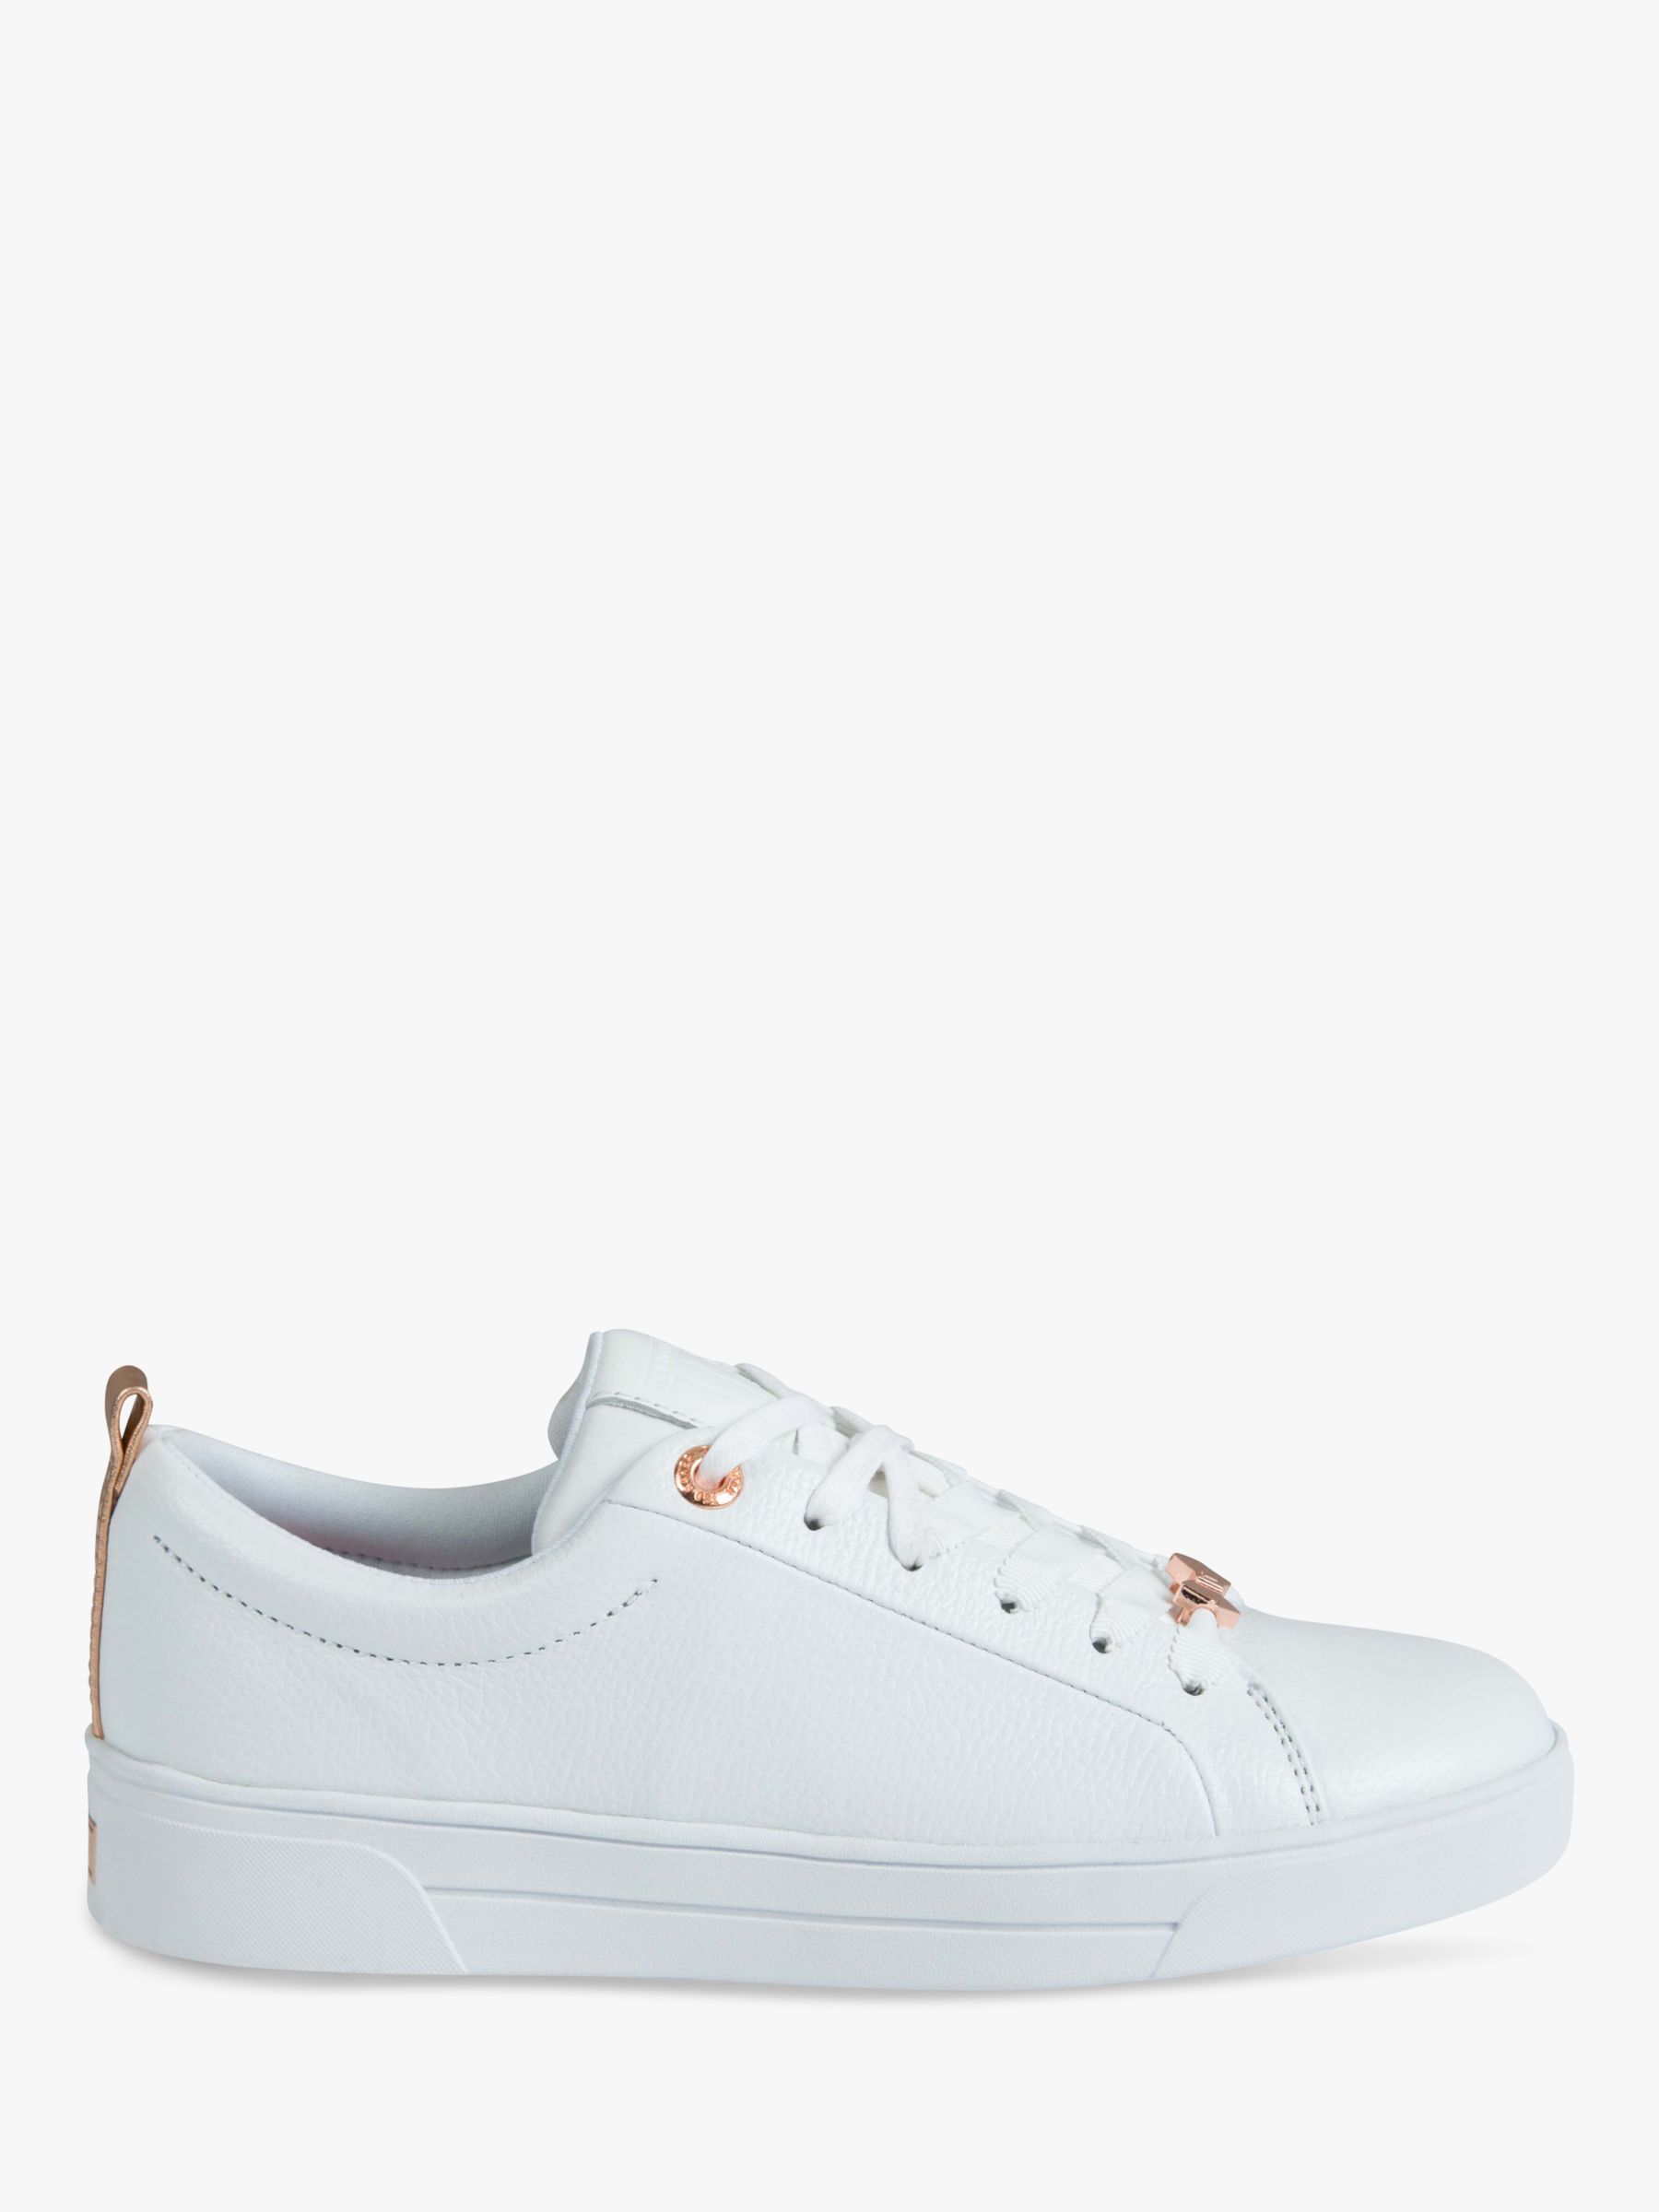 Ted Baker Gielli Lace Up Trainers, White Leather/Textile